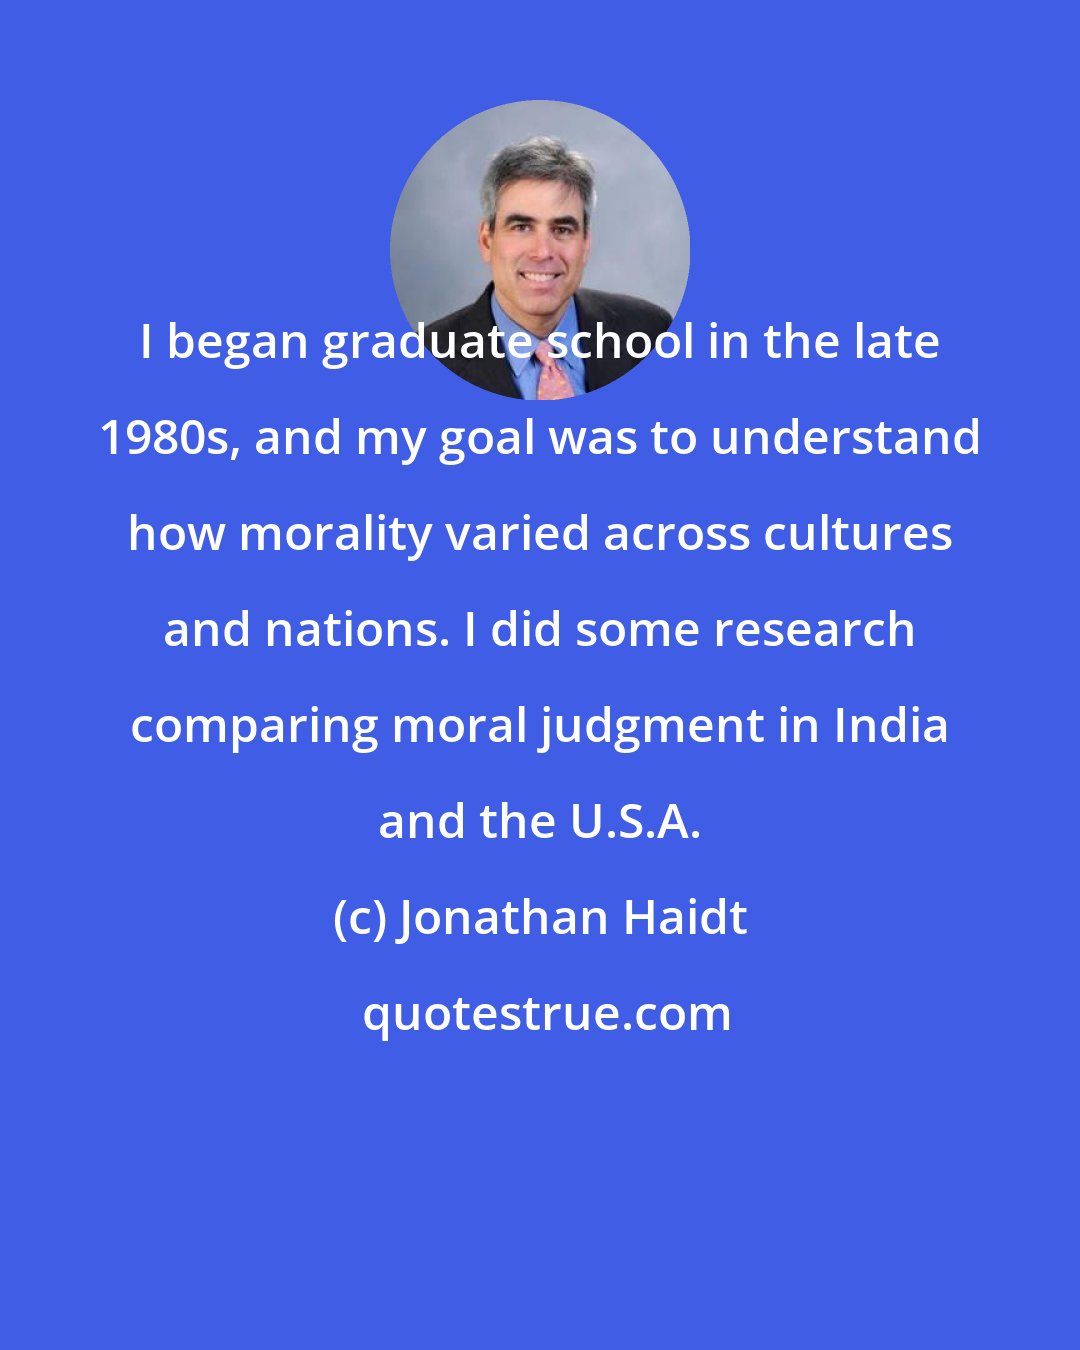 Jonathan Haidt: I began graduate school in the late 1980s, and my goal was to understand how morality varied across cultures and nations. I did some research comparing moral judgment in India and the U.S.A.